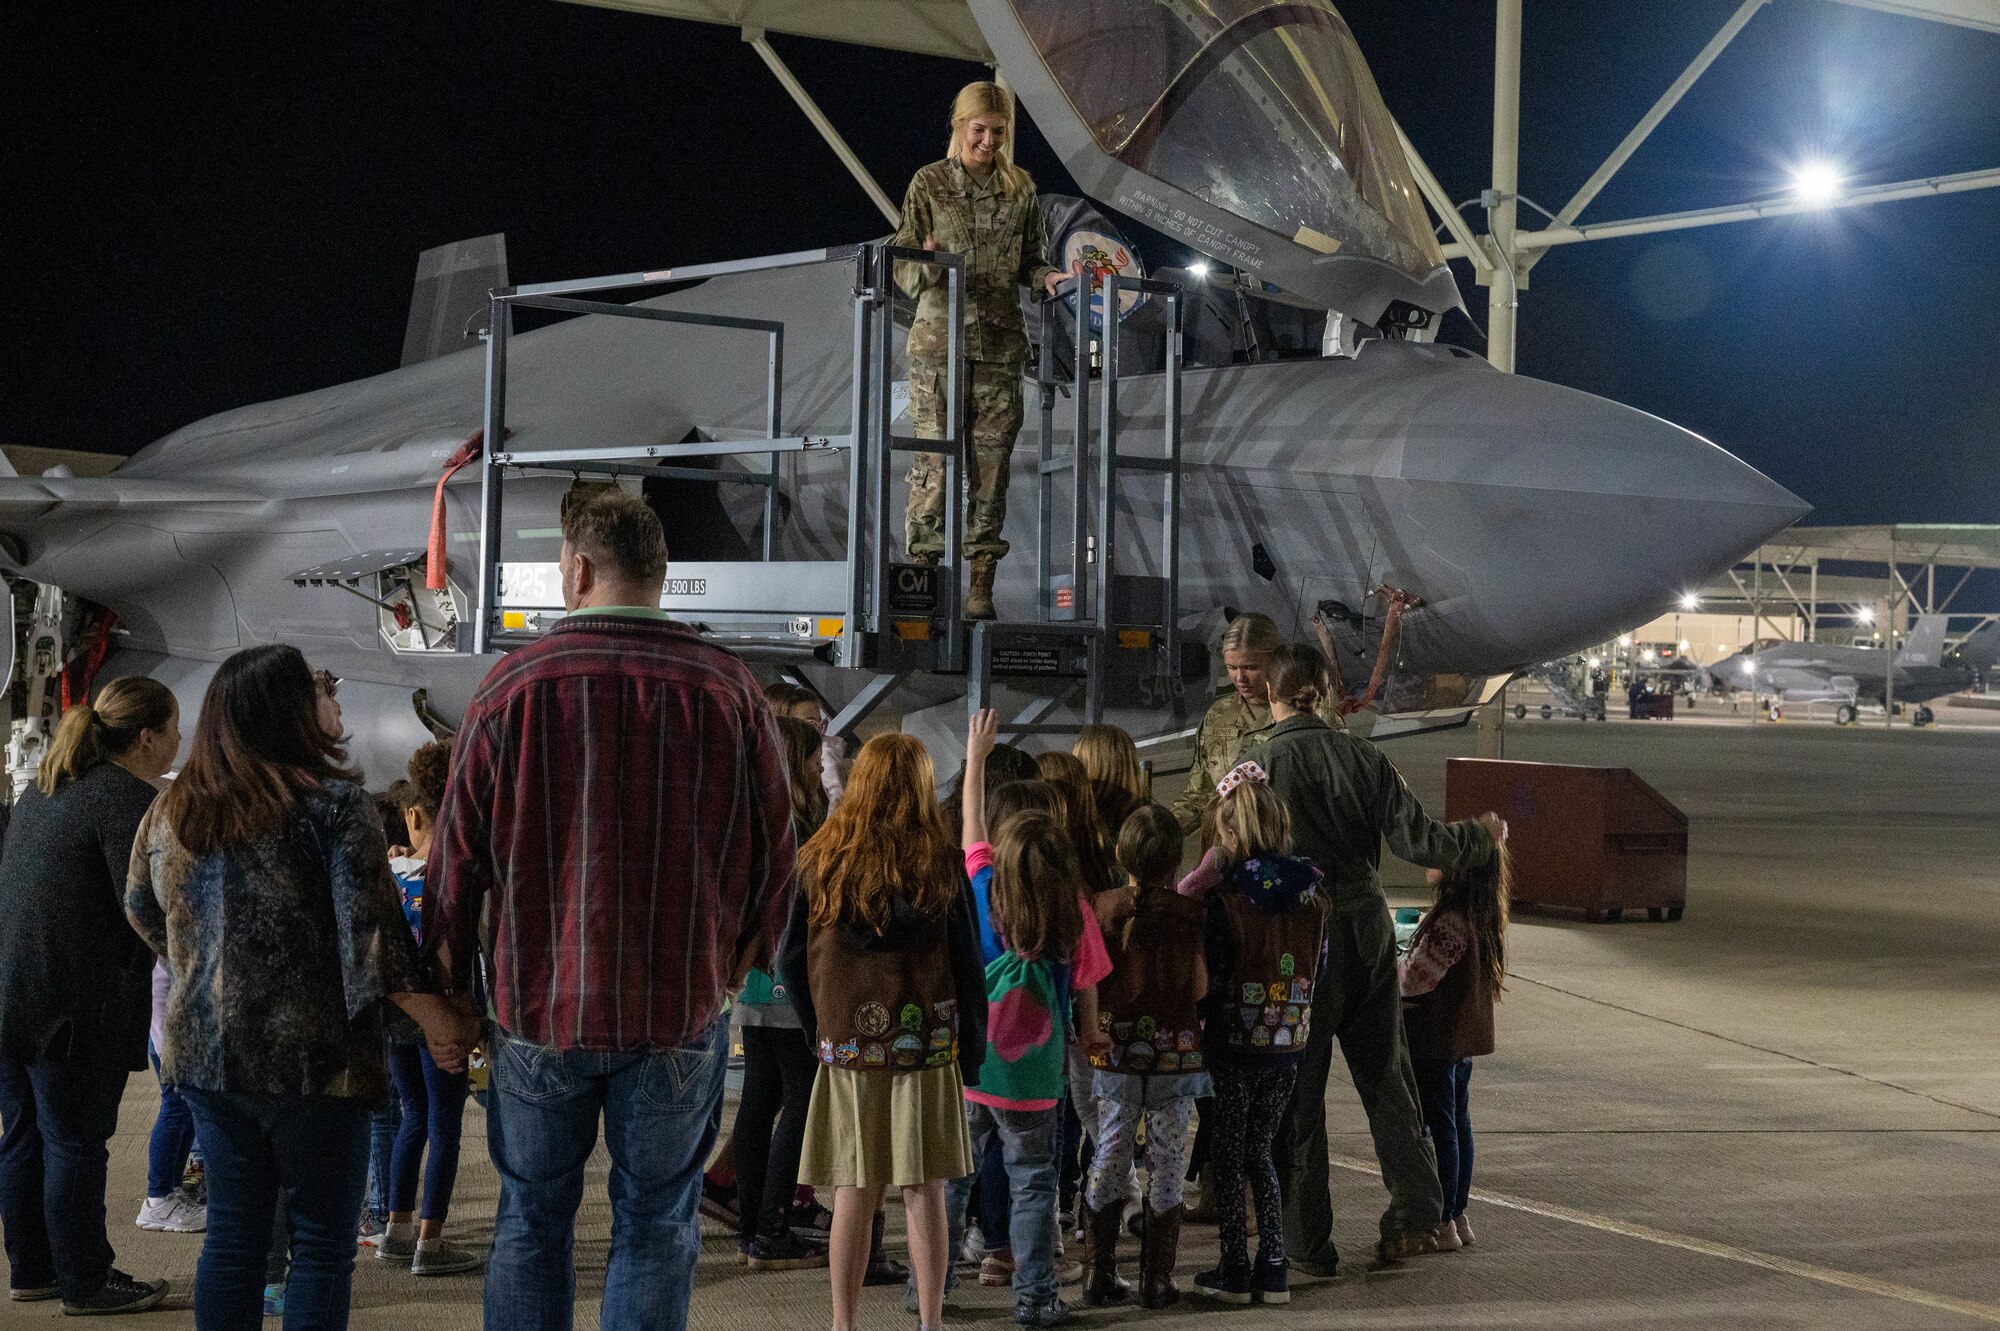 U.S. Air Force Airmen from the 62nd Fighter Squadron and 62nd Aircraft Maintenance Unit showcase an F-35A Lightning II aircraft to a local Girl Scouts troop Jan. 11, 2023, at Luke Air Force Base, Arizona.